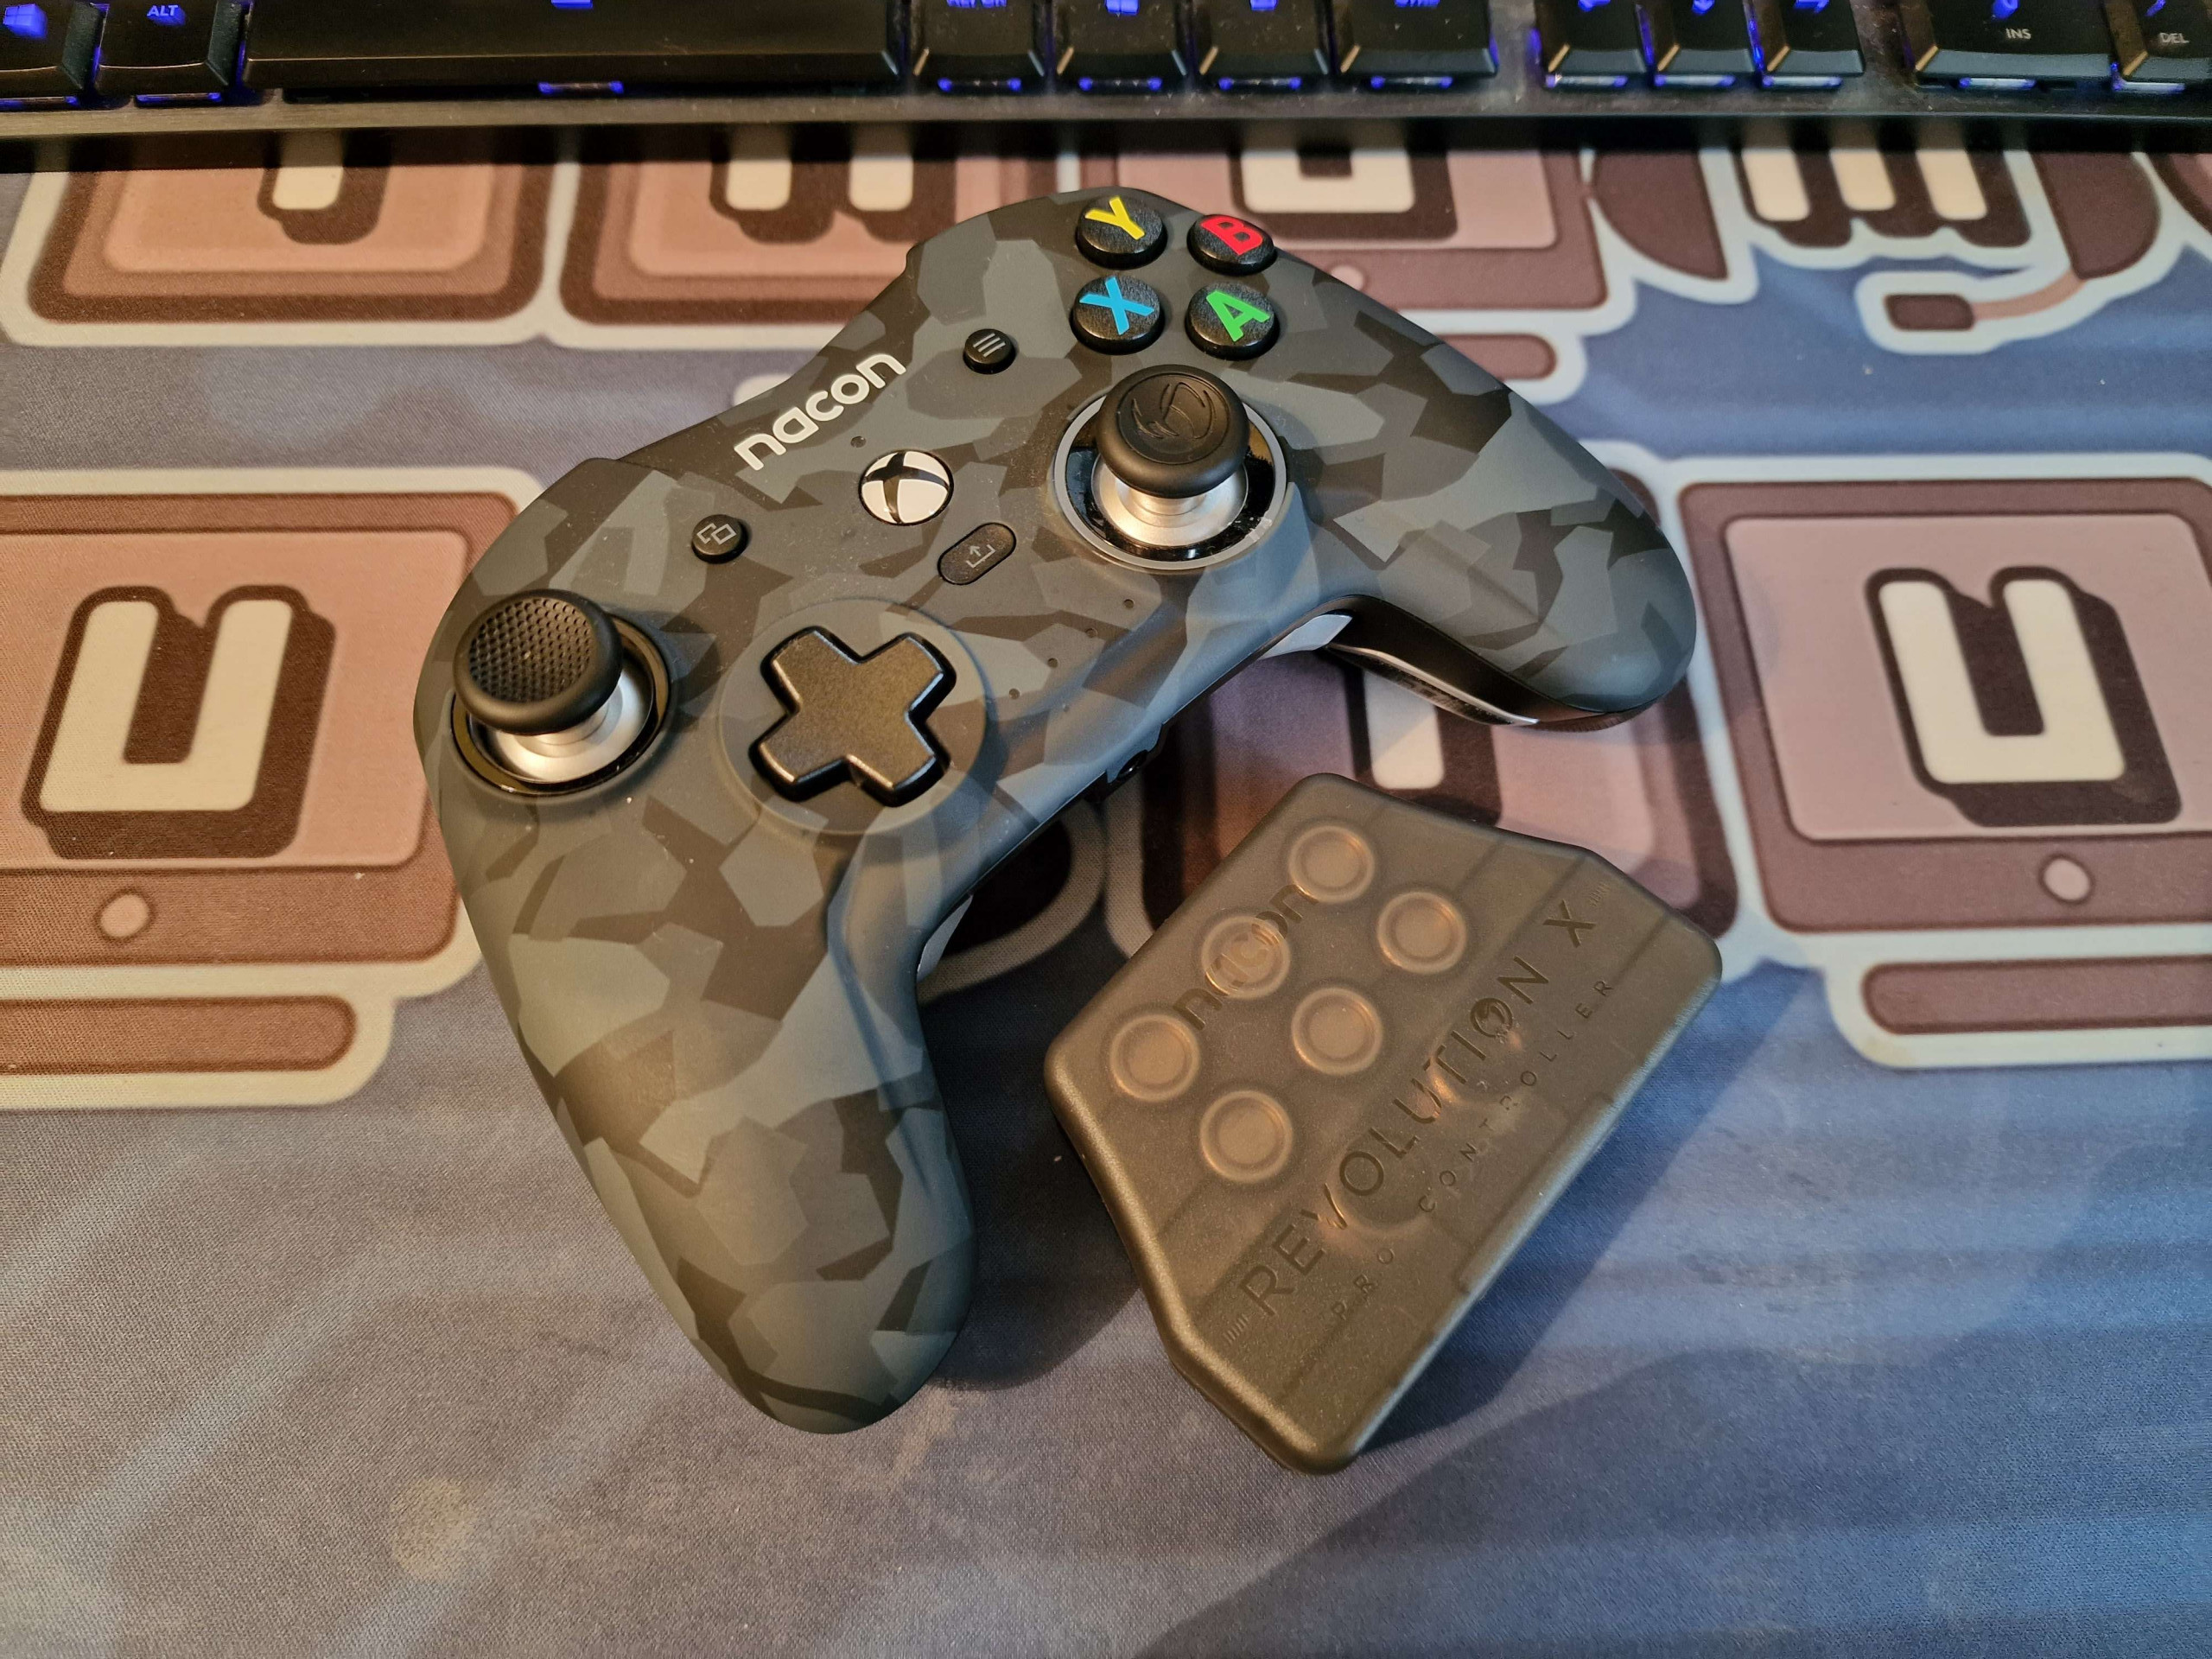 Nacon Revolution X Pro Controller sitting on top of a Thumb Culture mousemat, a small case sits beneath that contains the weights and extra thumbstick necks and ends